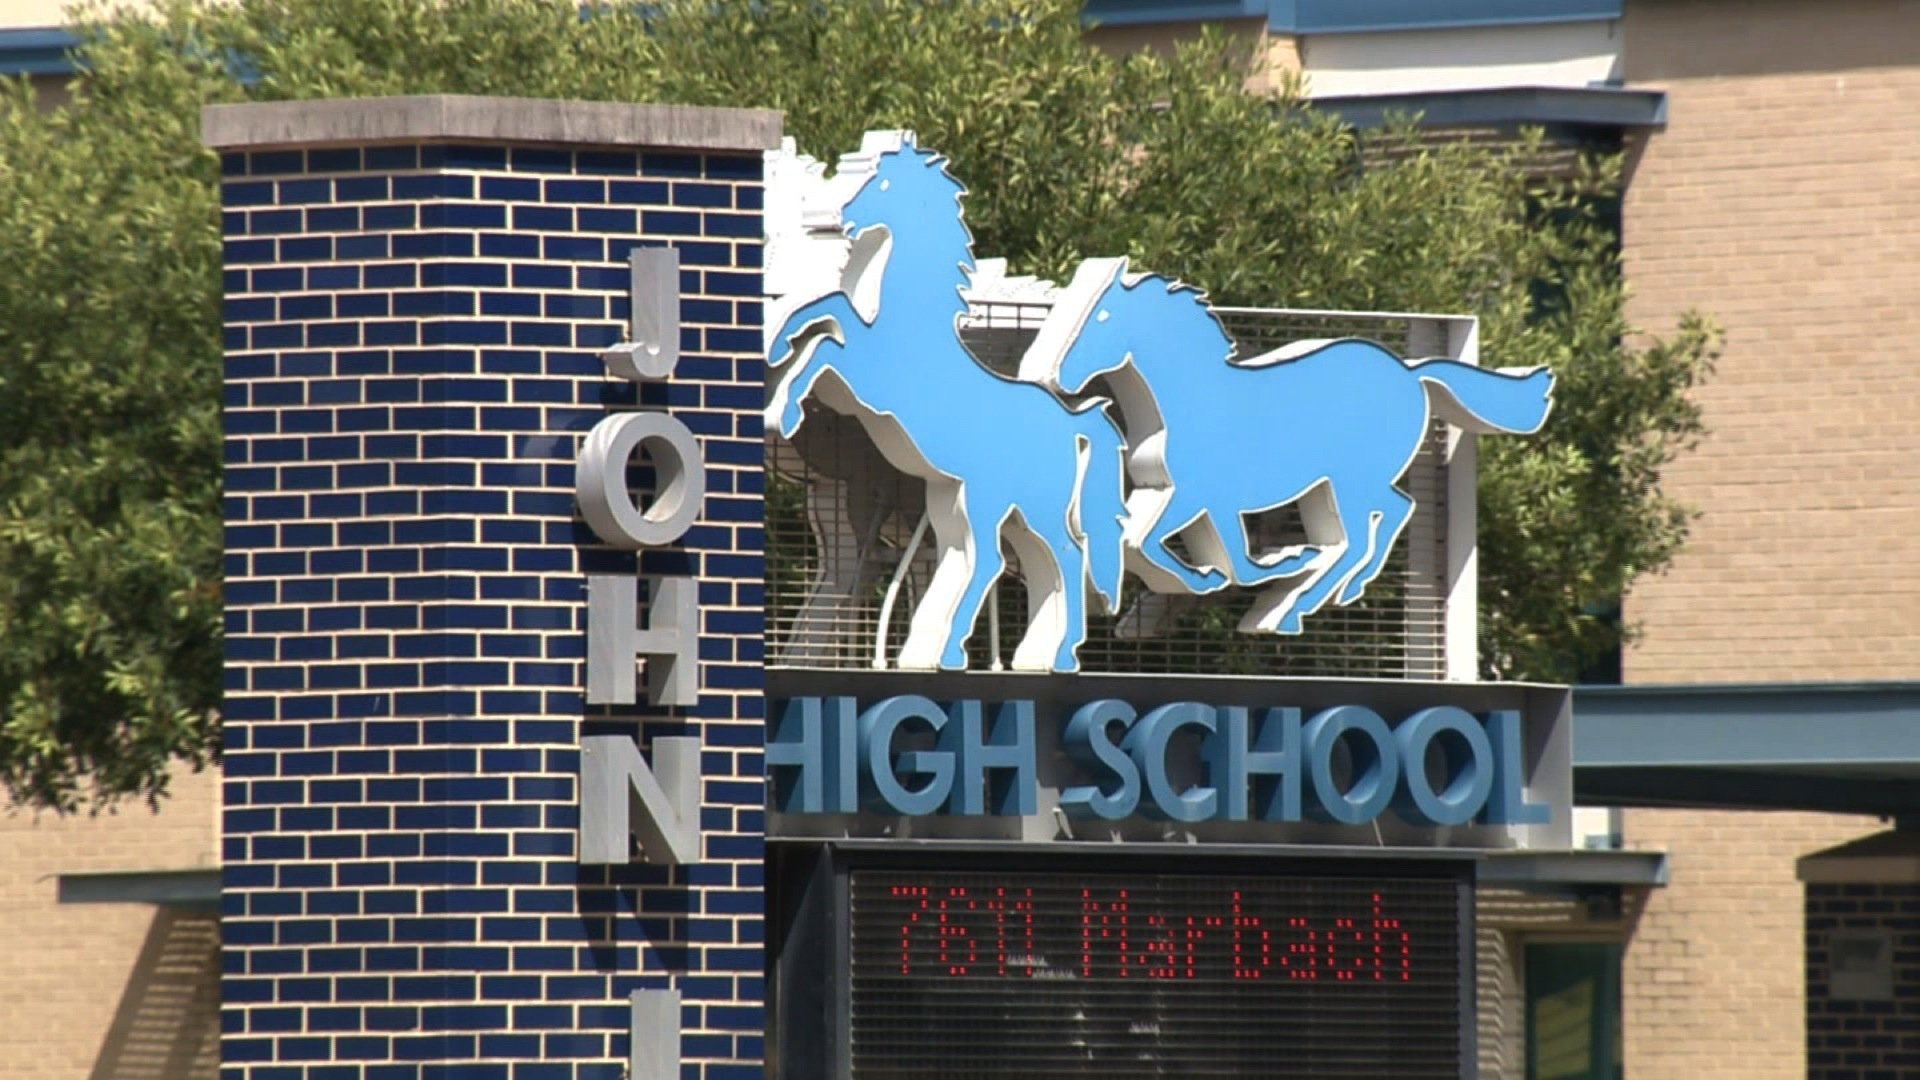 **Embargo: San Antonio, TX**

Video shows two Texas high school football players from John Jay High School in San Antonio hitting an unsuspecting game official. The players were ejected and suspended and Marble Falls police are investigating the incident.